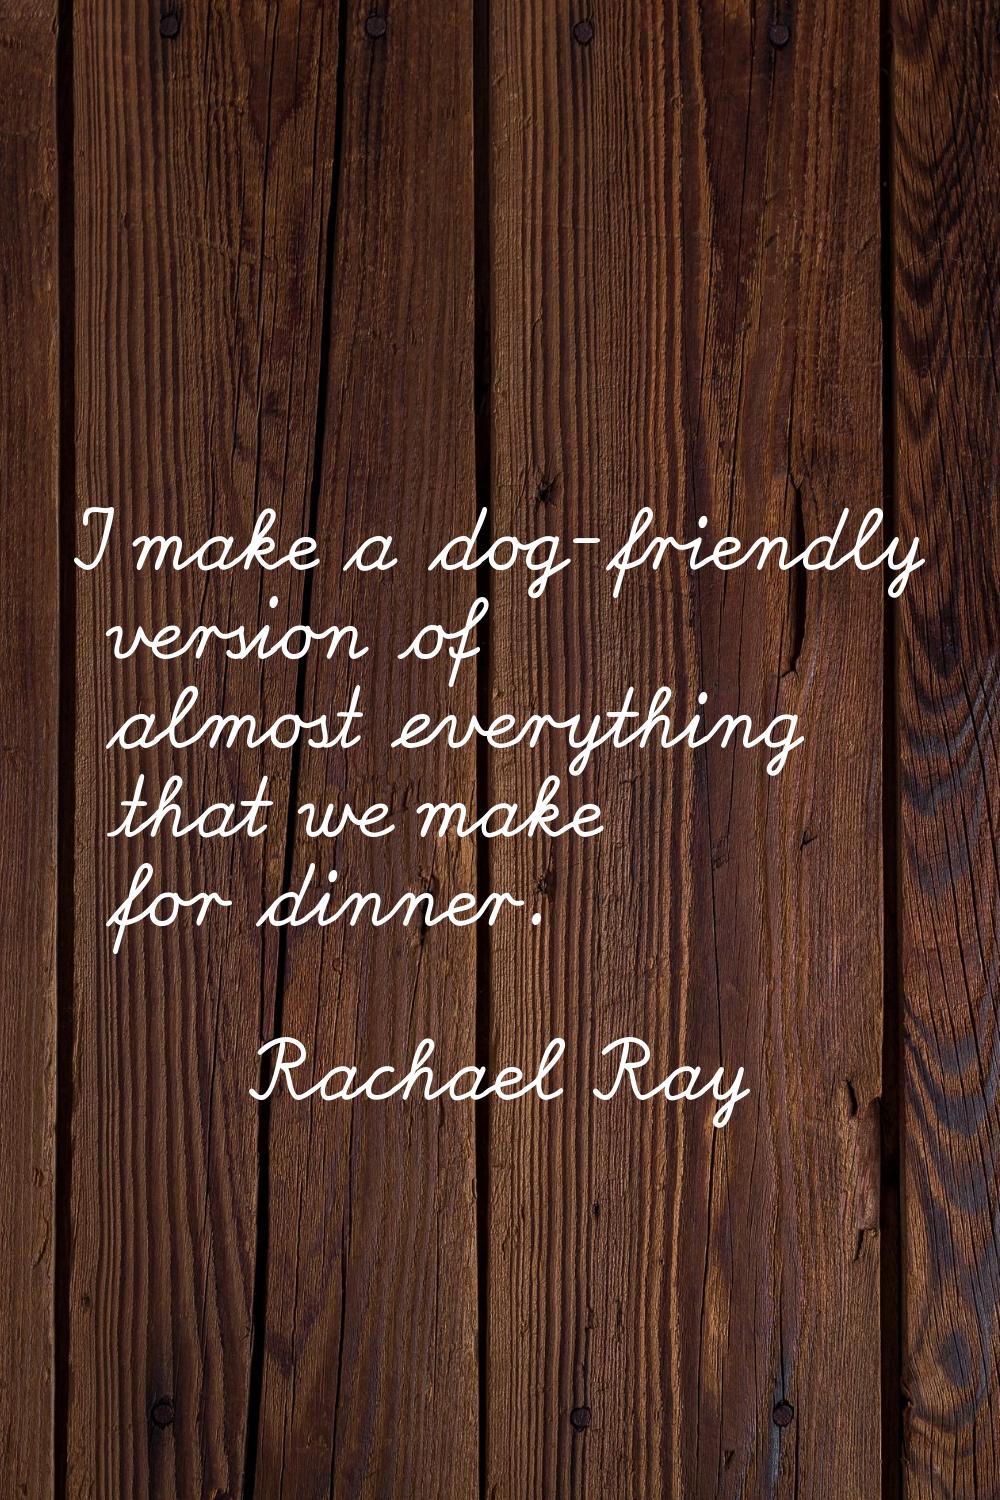 I make a dog-friendly version of almost everything that we make for dinner.